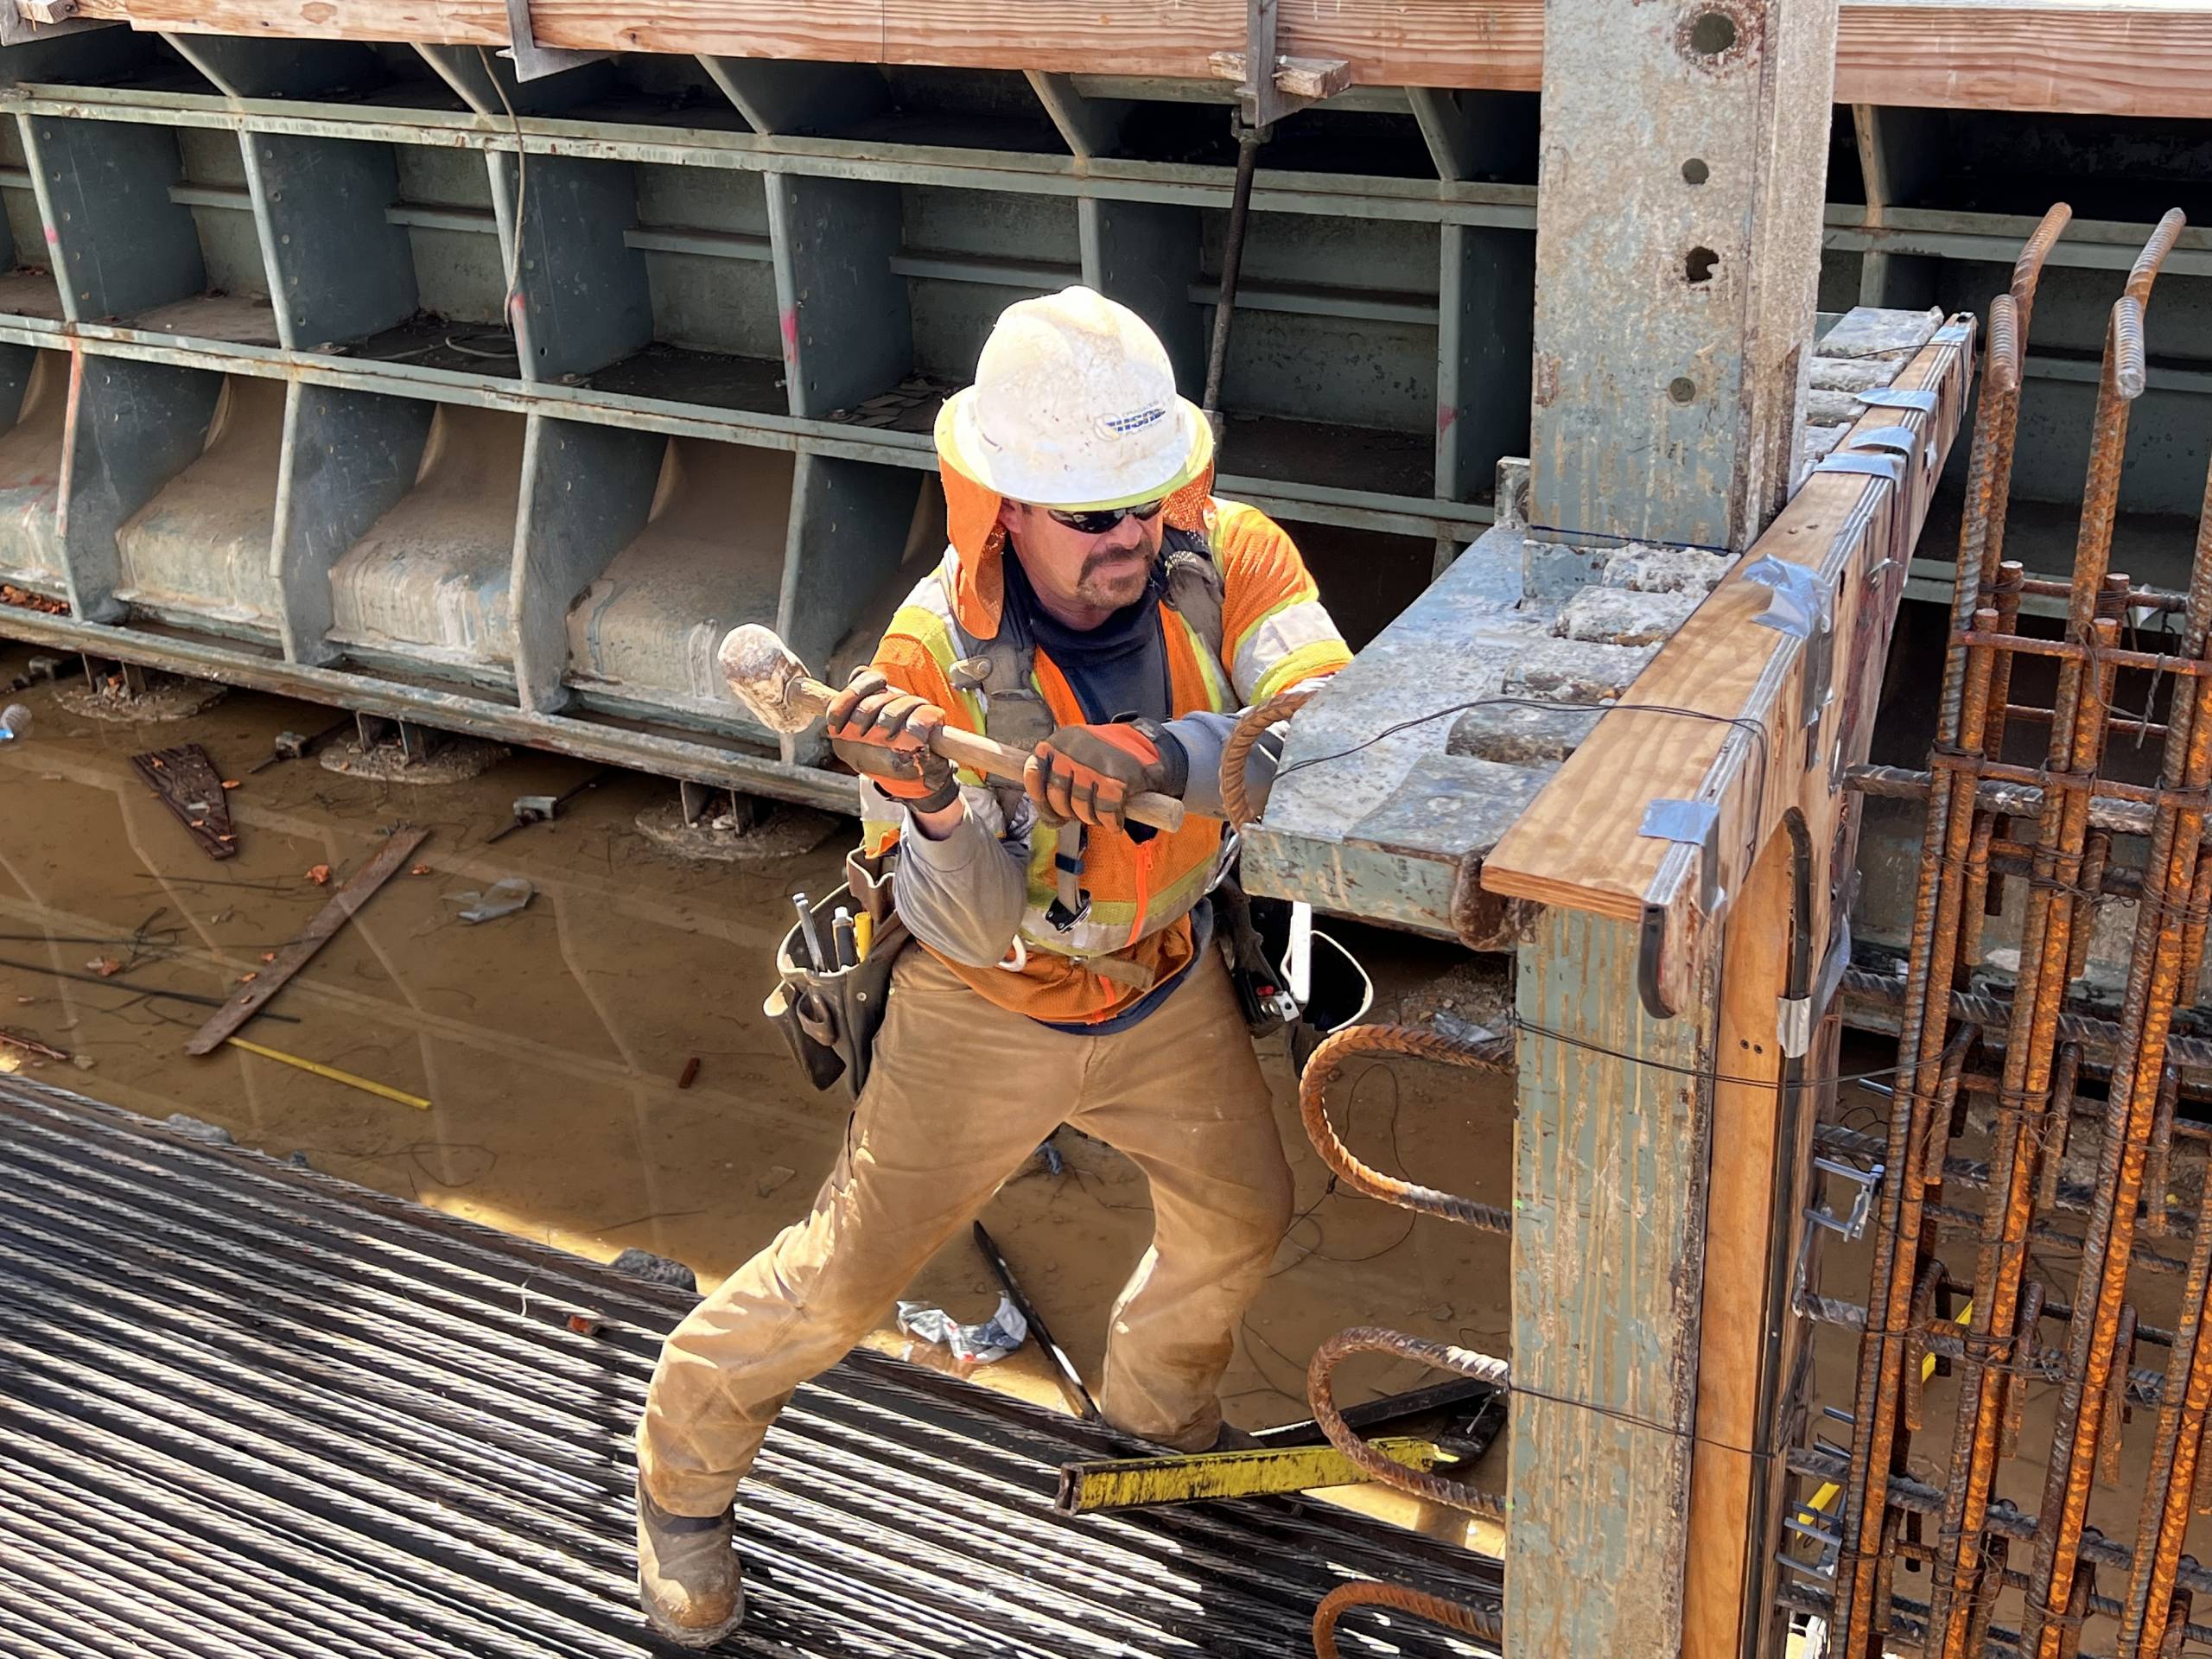 A construction work in an orange vest and white hard hat hammers a steel beam.